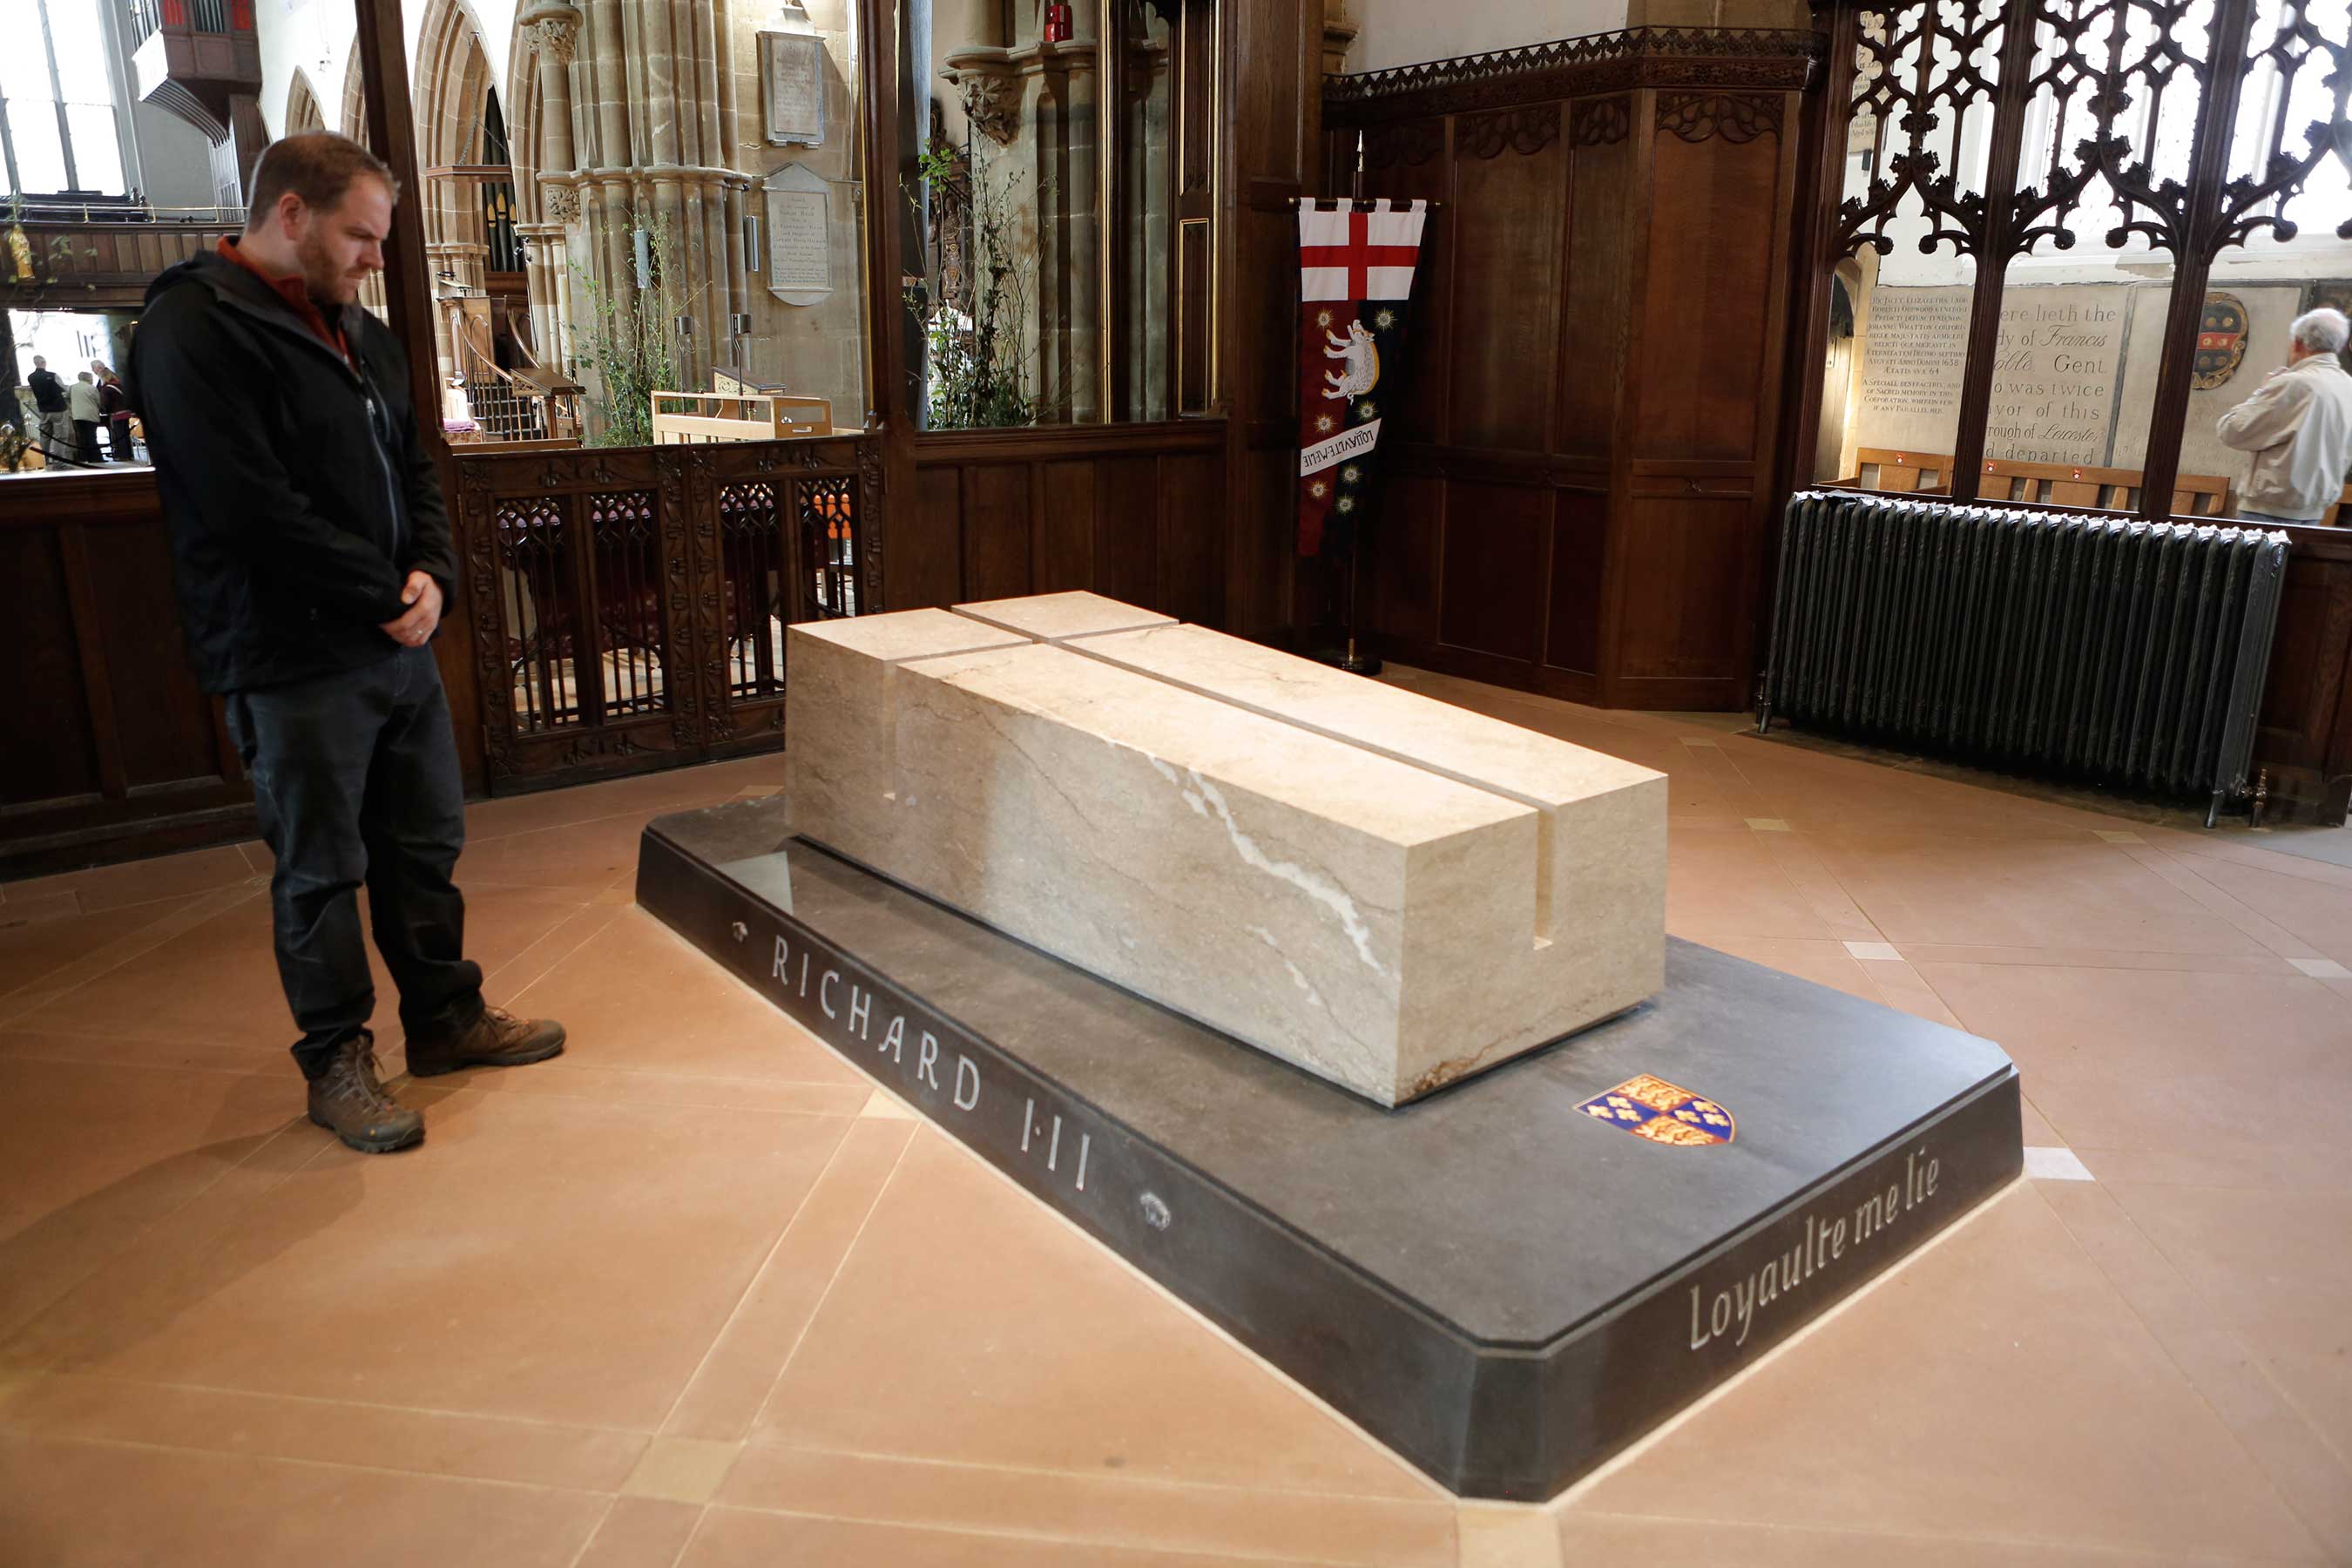 While in England, Josh Gates makes a stop at Leicester Cathedral to see the crypt of King Richard III. After missing for 400 years, his remains were recently discovered under a nearby parking lot.